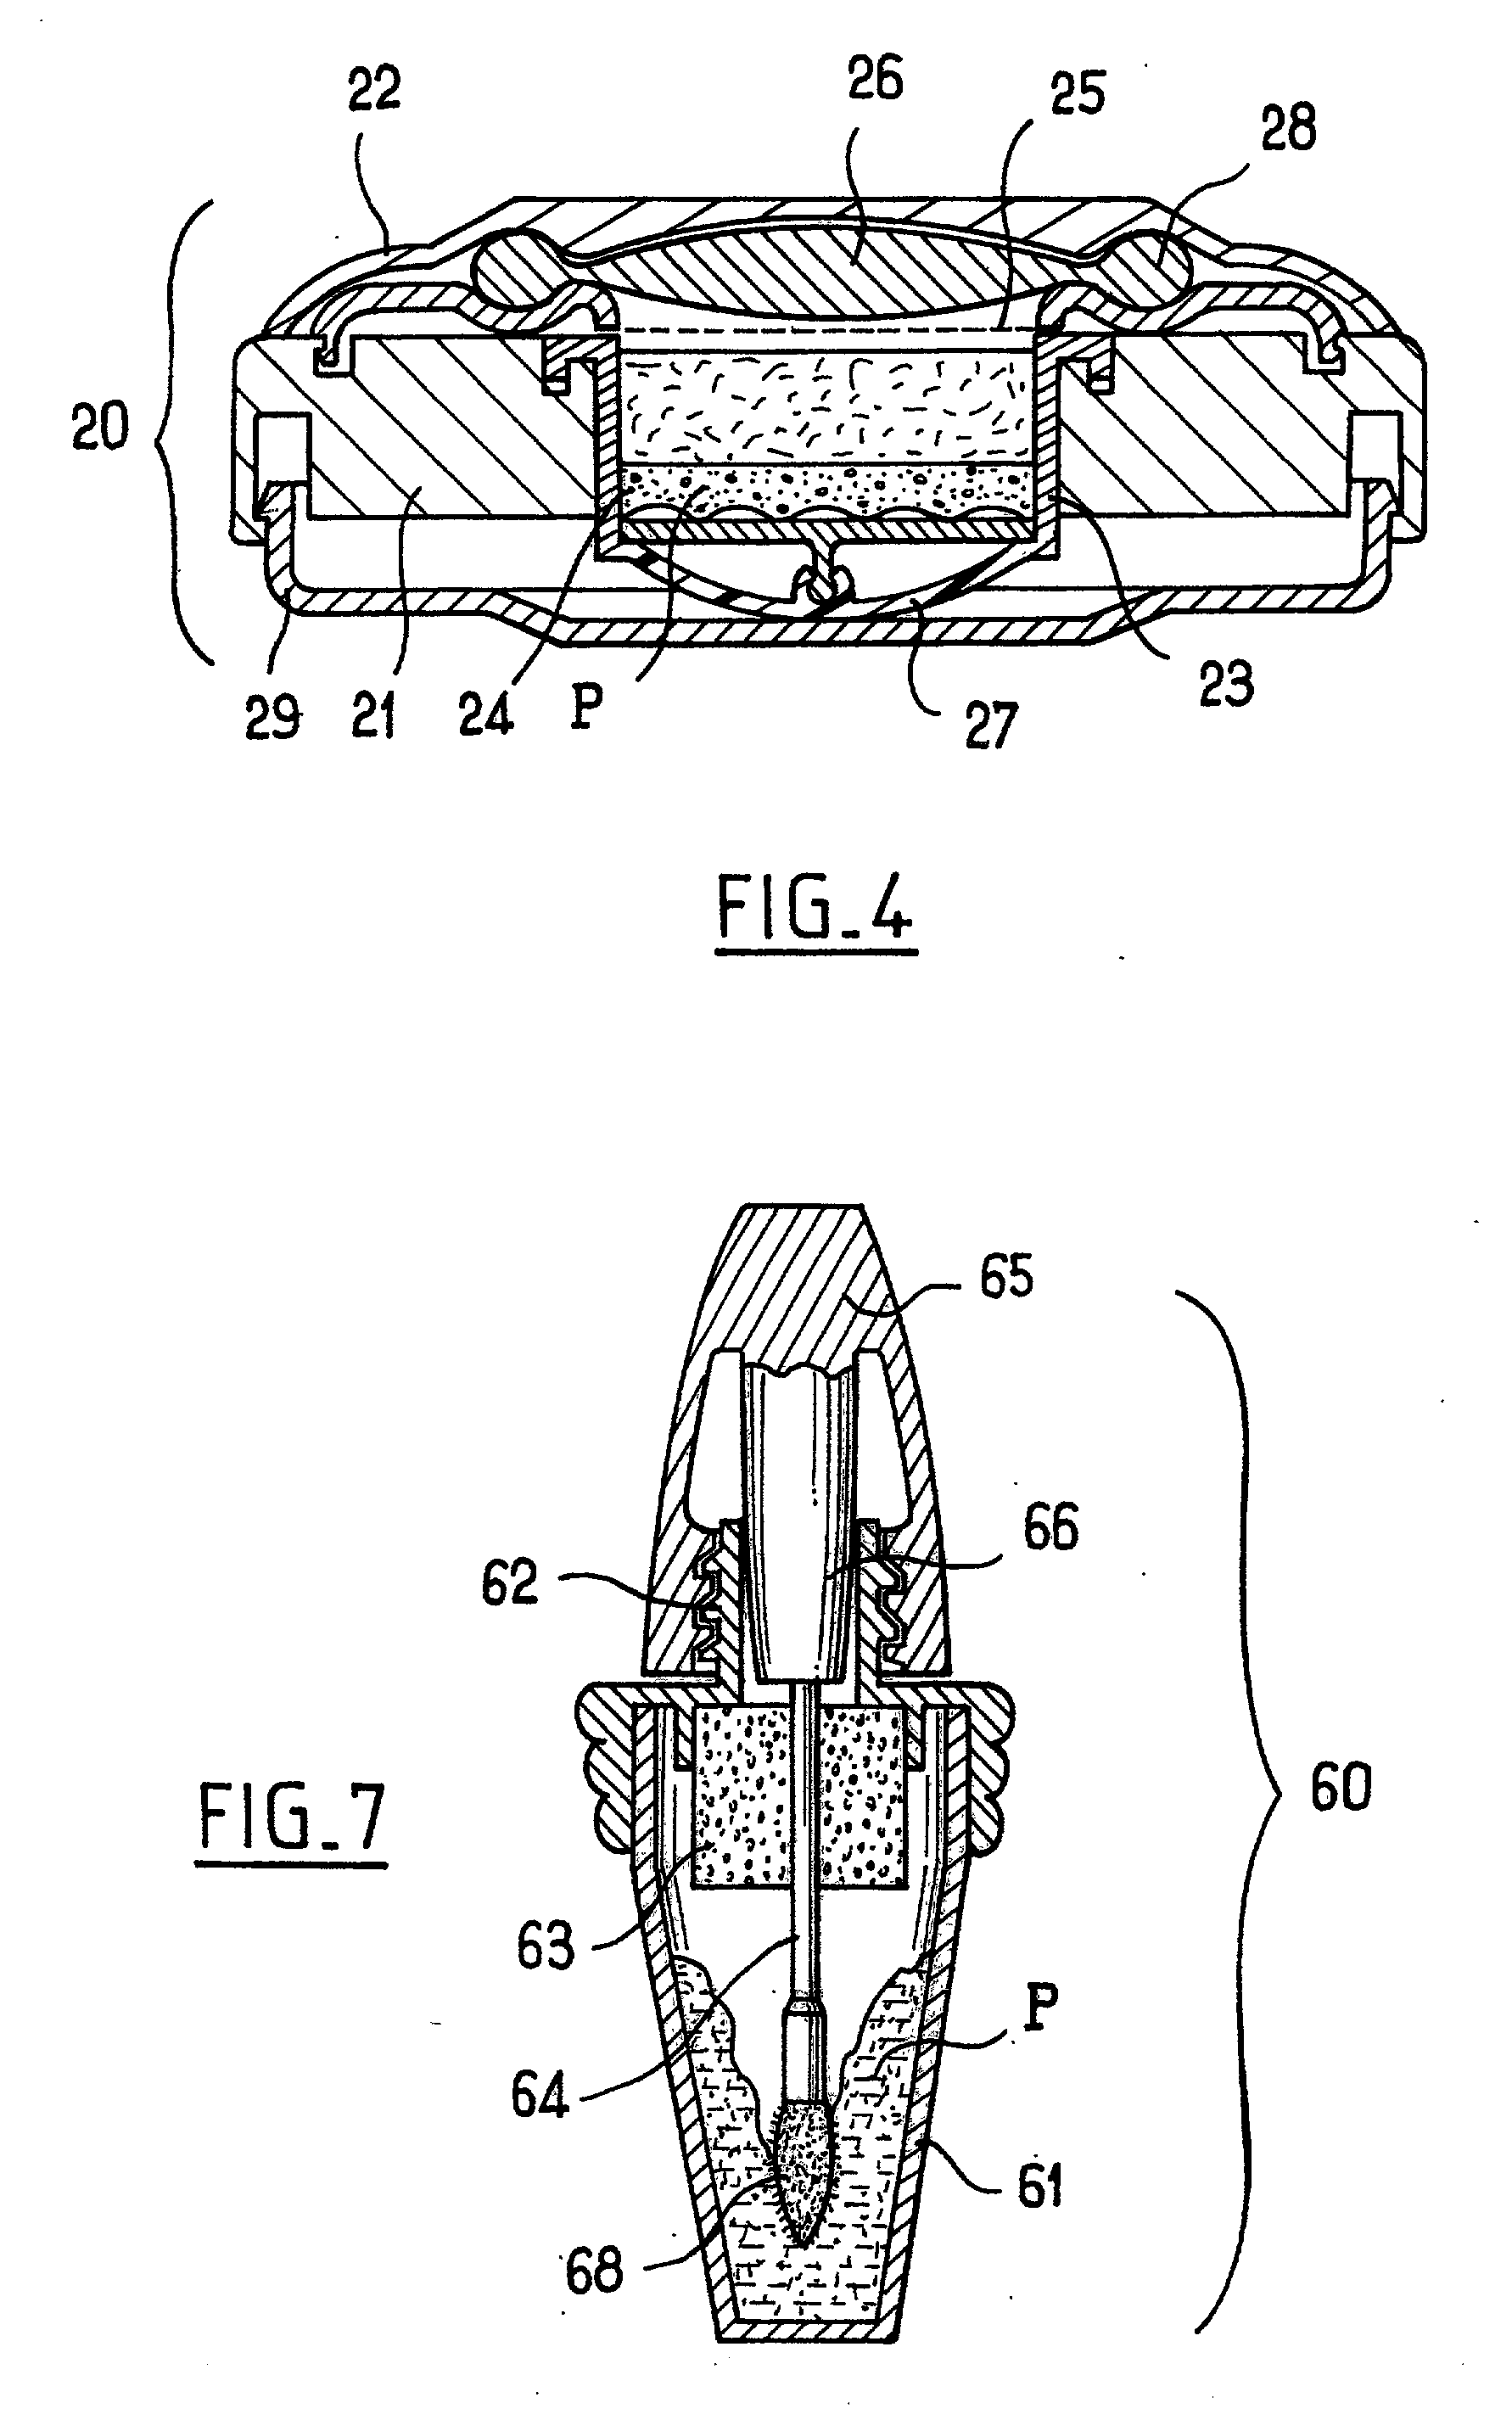 Device having a magnetic applicator and/or wiper member